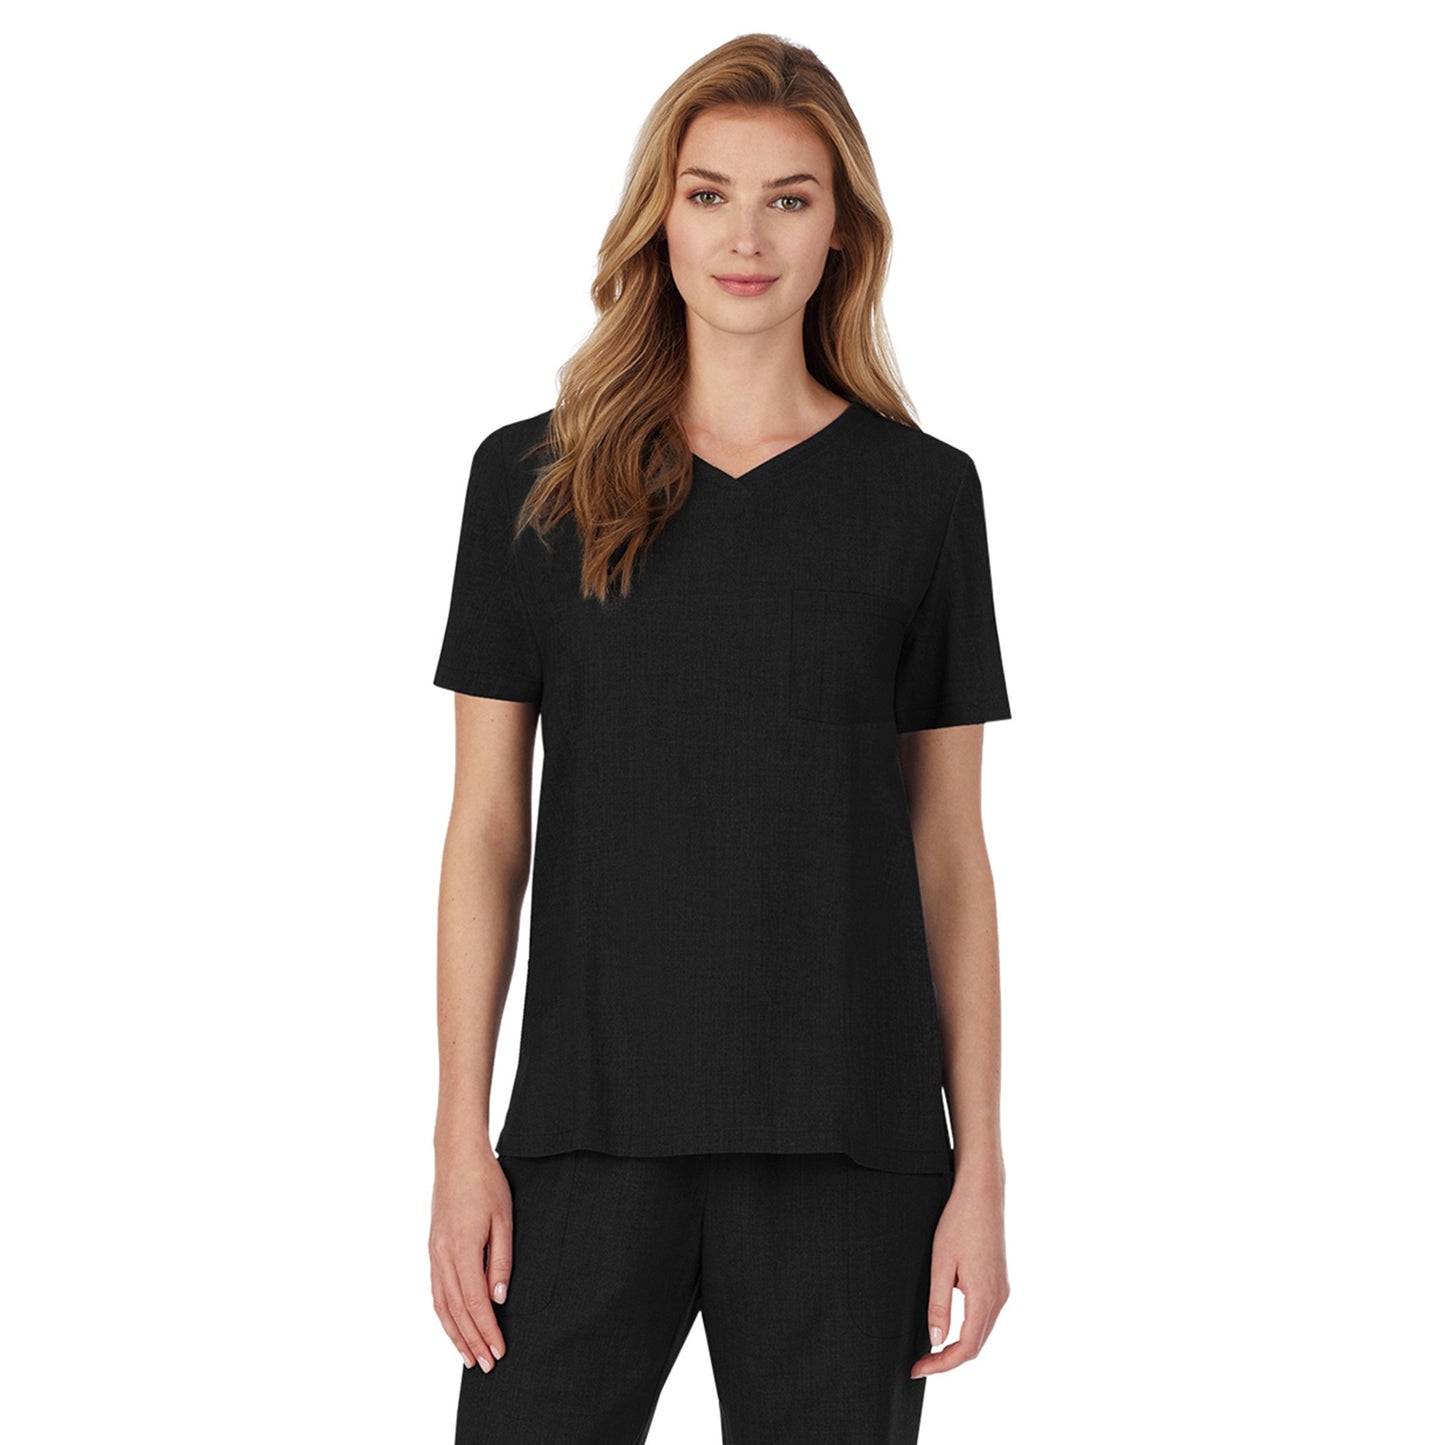 Black;Model is wearing size S. She is 5’9”, Bust 32”, Waist 23", Hips 34.5”.@A lady wearing black short sleeve scrub v-neck top with chest pocket.